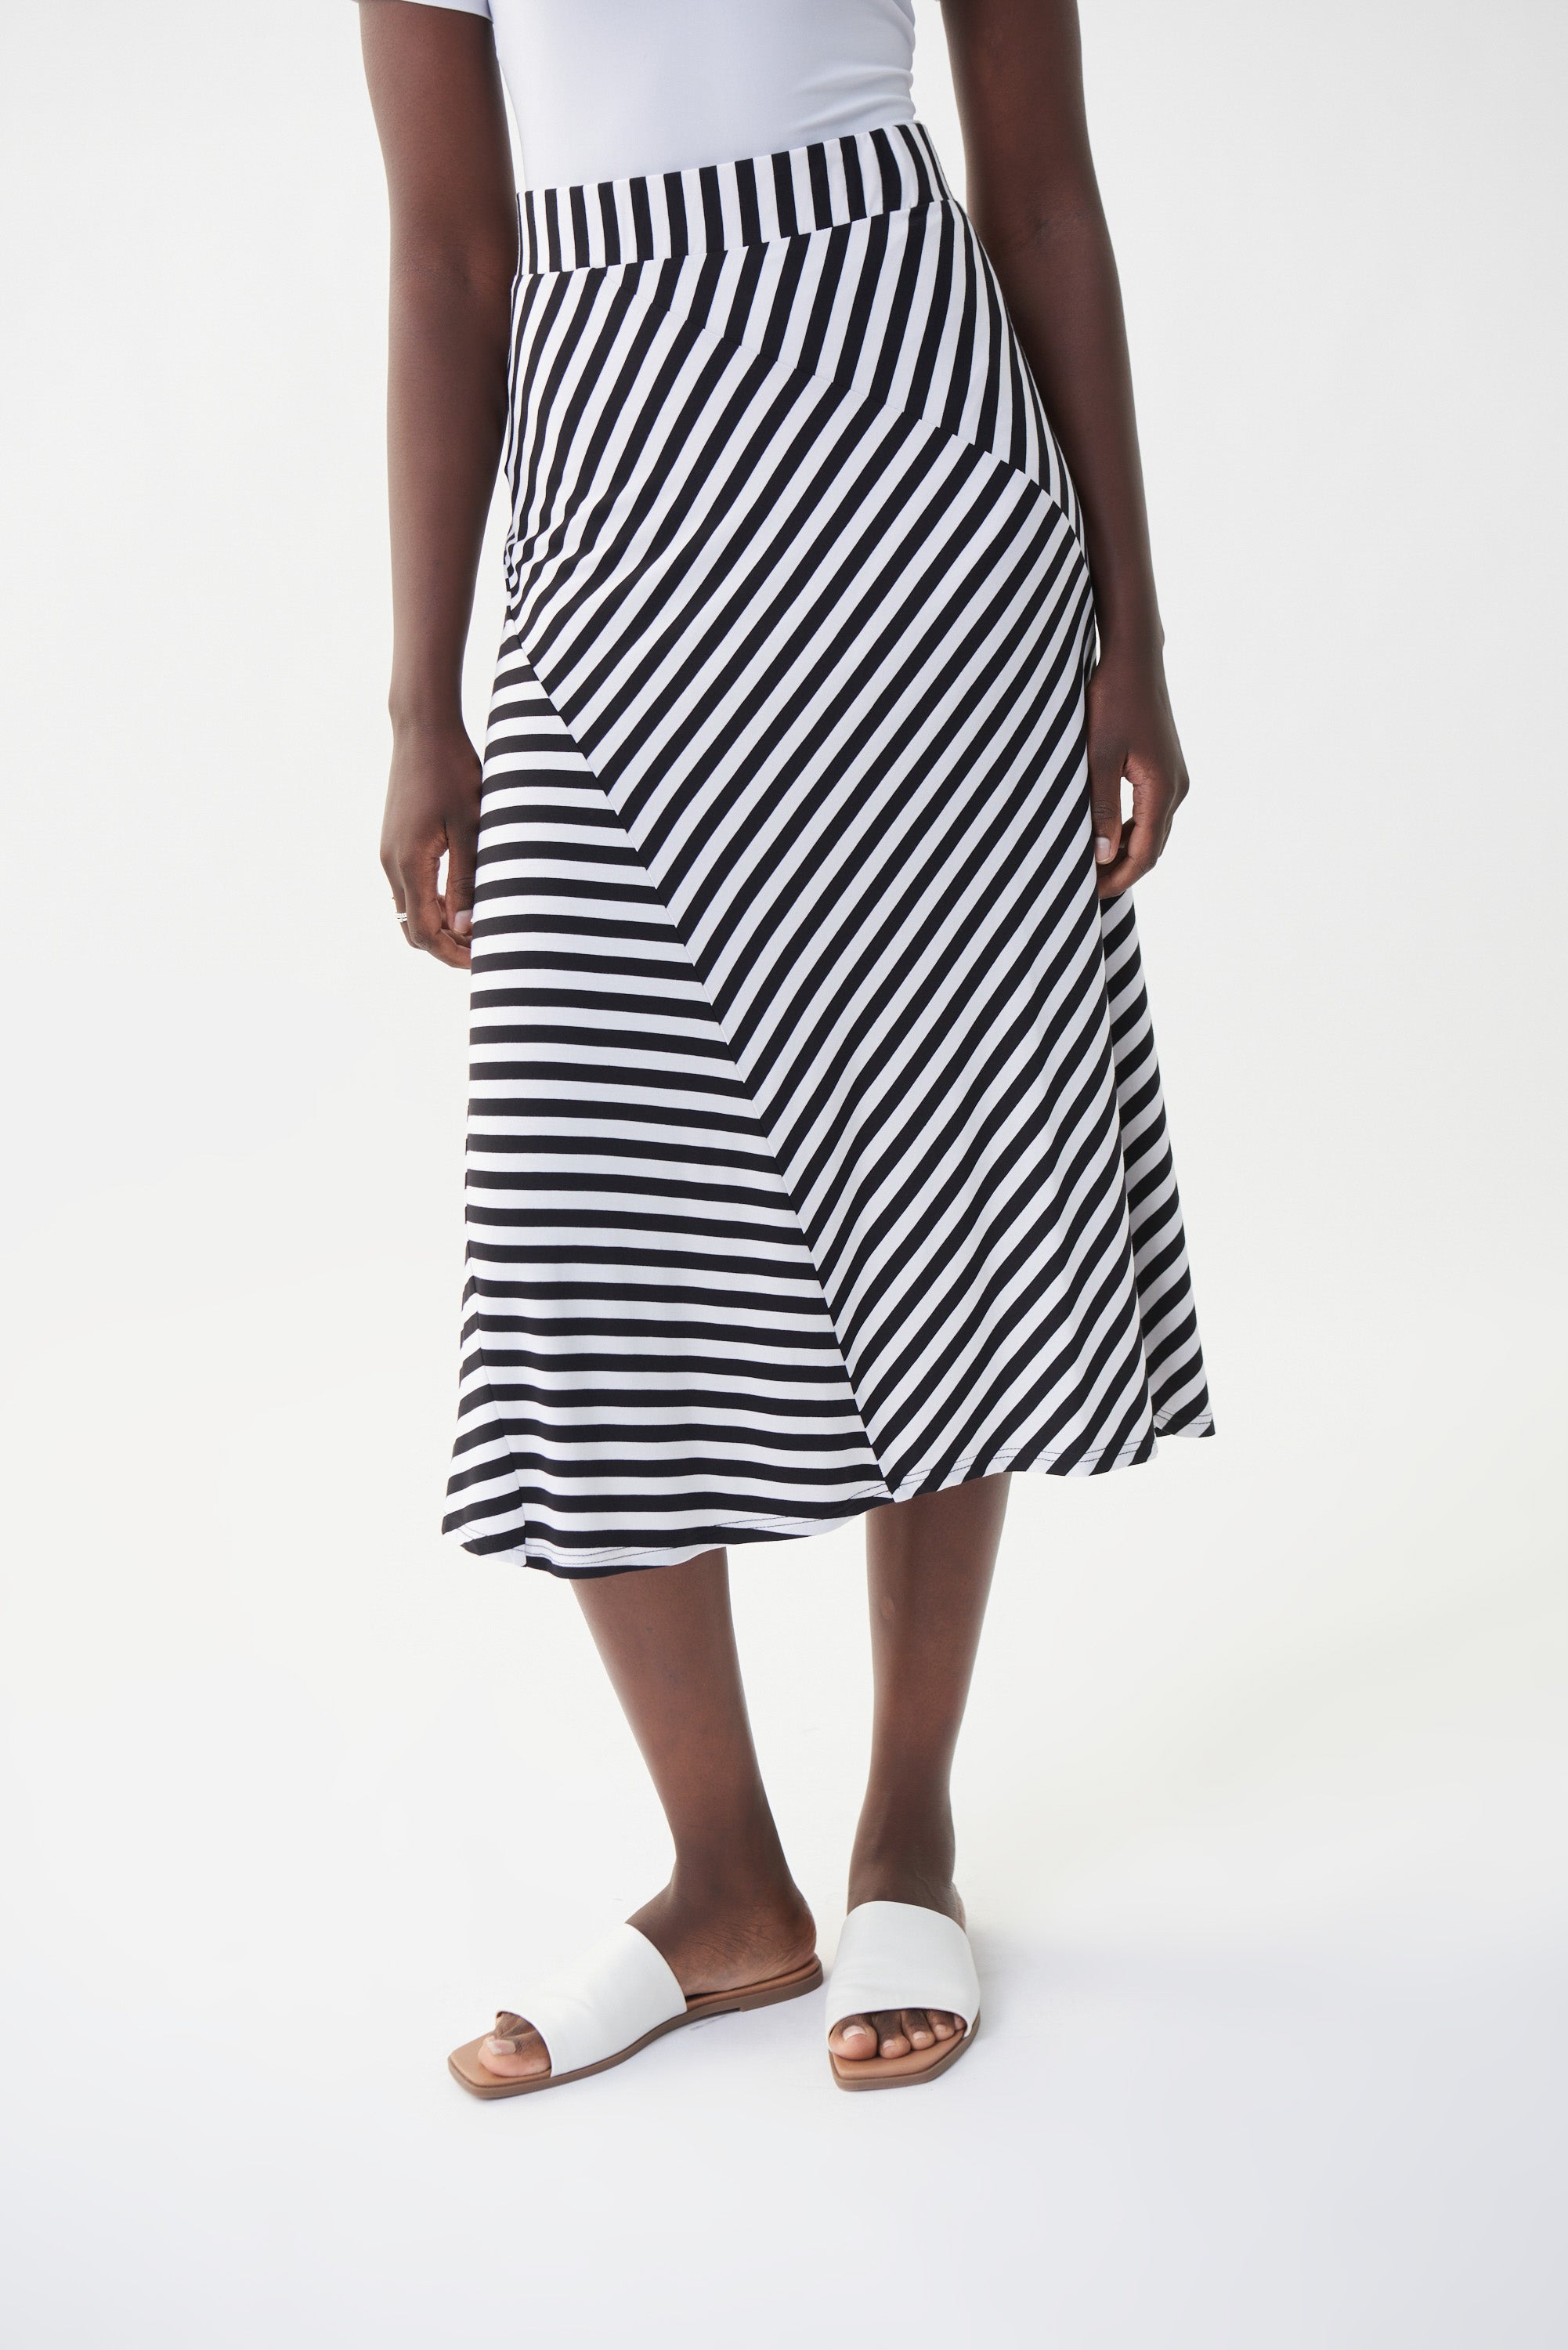 This lovely Joseph Ribkoff Stripe Skirt features a comfortable elastic waist, lightweight fabric and diagonally stitched panels, offering a stylish and visually unique twist on a classic. Proudly made in Canada.